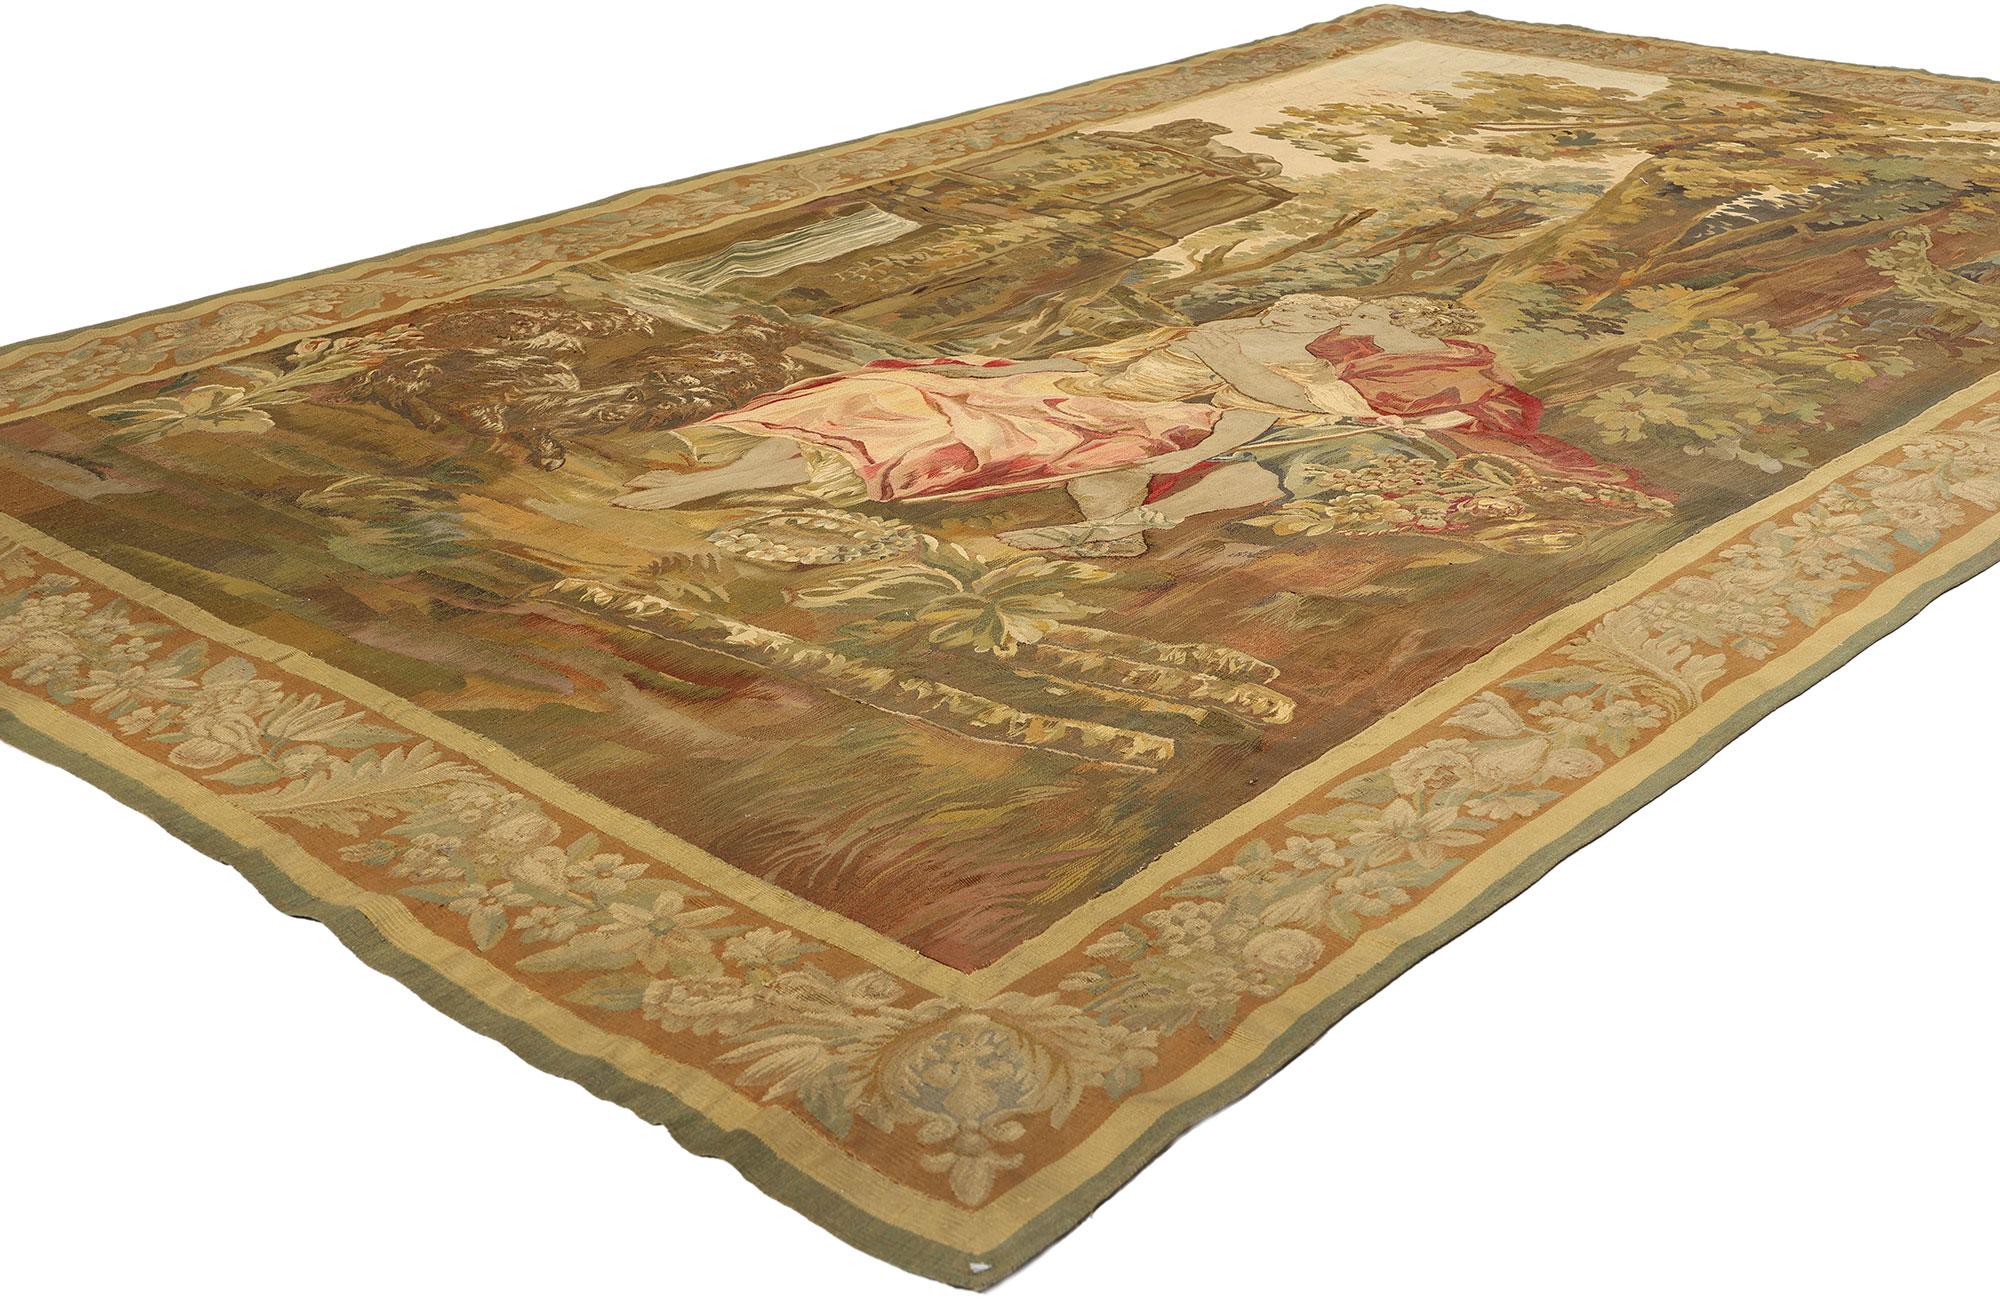 77225 Antique French Aubusson Tapestry Inspired by Francois Boucher, 06'02 x 09'11. Nestled in the heart of Aubusson, France, French Aubusson tapestries have enchanted admirers since the 14th century with their mesmerizing tapestry technique and